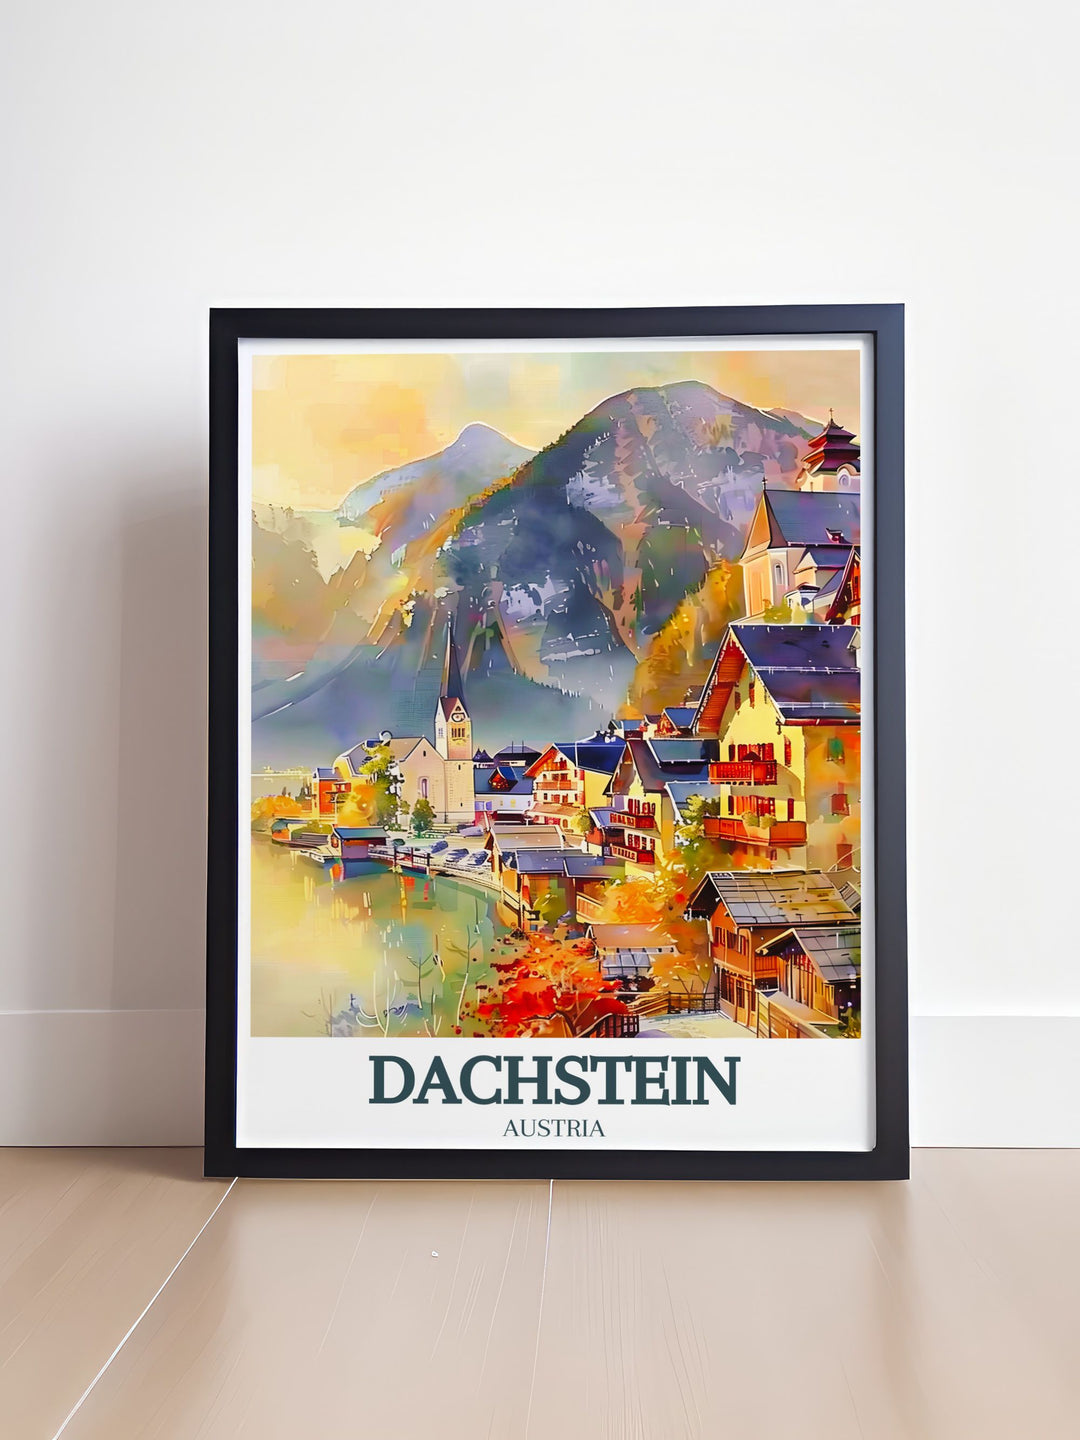 Elegant Hallstatt Lake, Village of Hallstatt poster presenting the beautiful Austrian village and its serene lake ideal for adding a touch of natural beauty to any room.